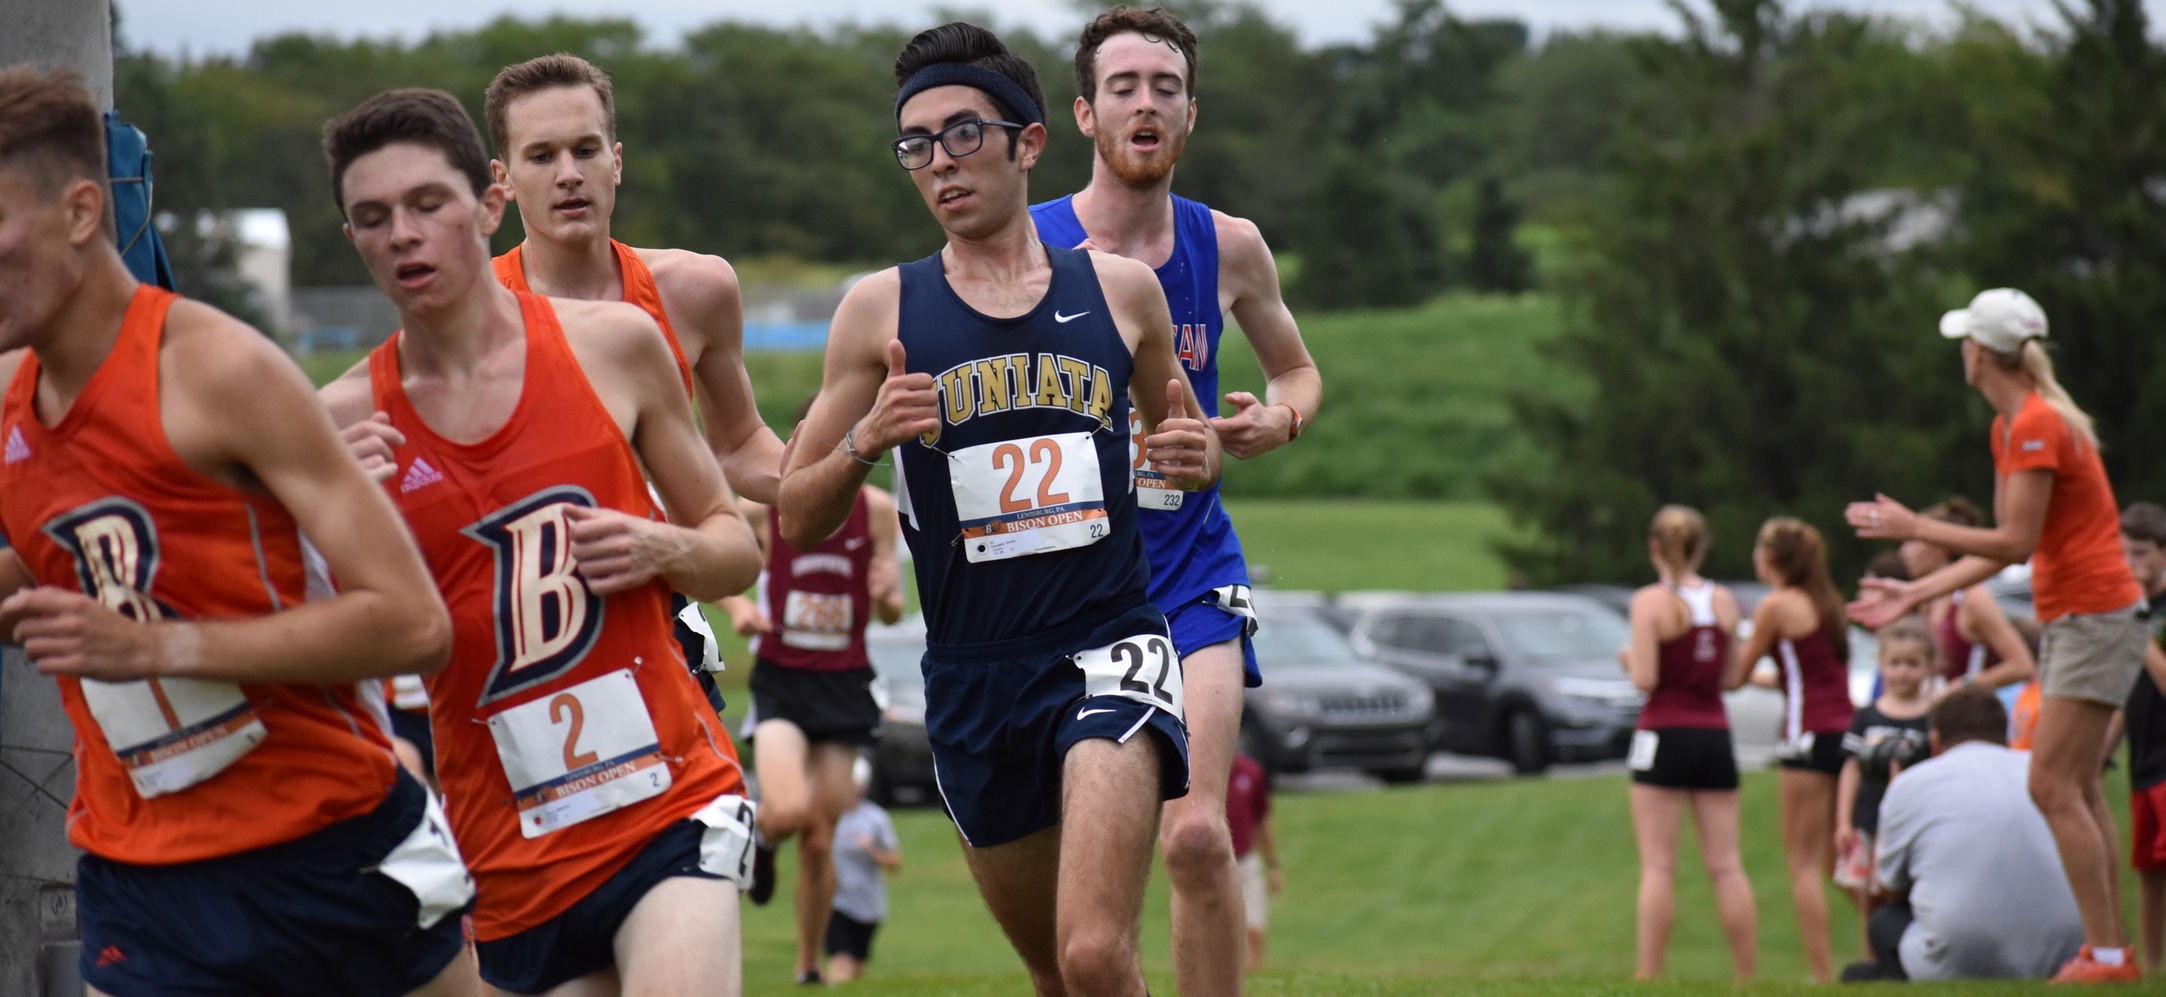 Eagles Place Fifth at Gettysburg Invitational